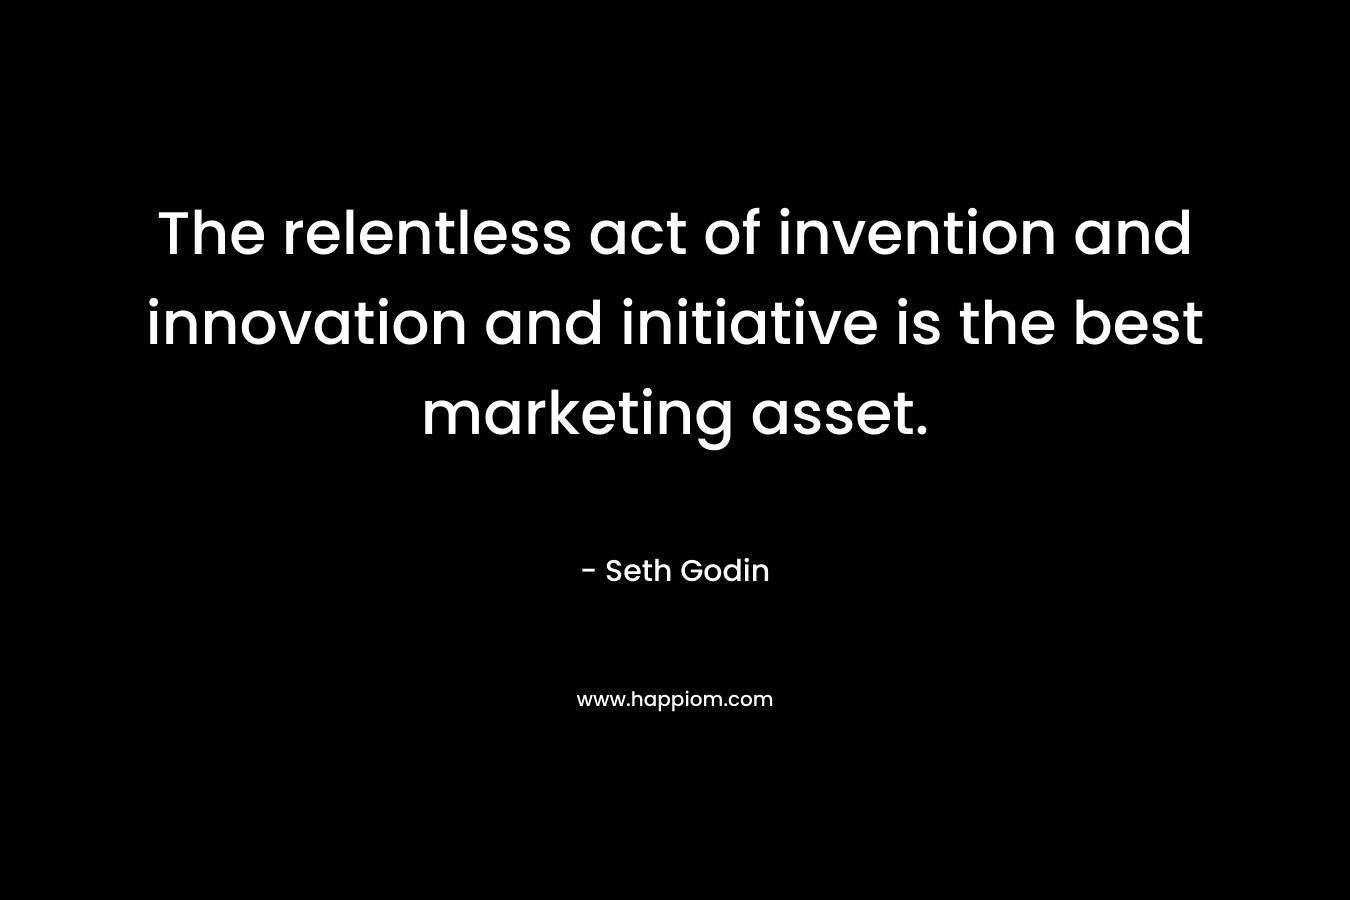 The relentless act of invention and innovation and initiative is the best marketing asset. – Seth Godin